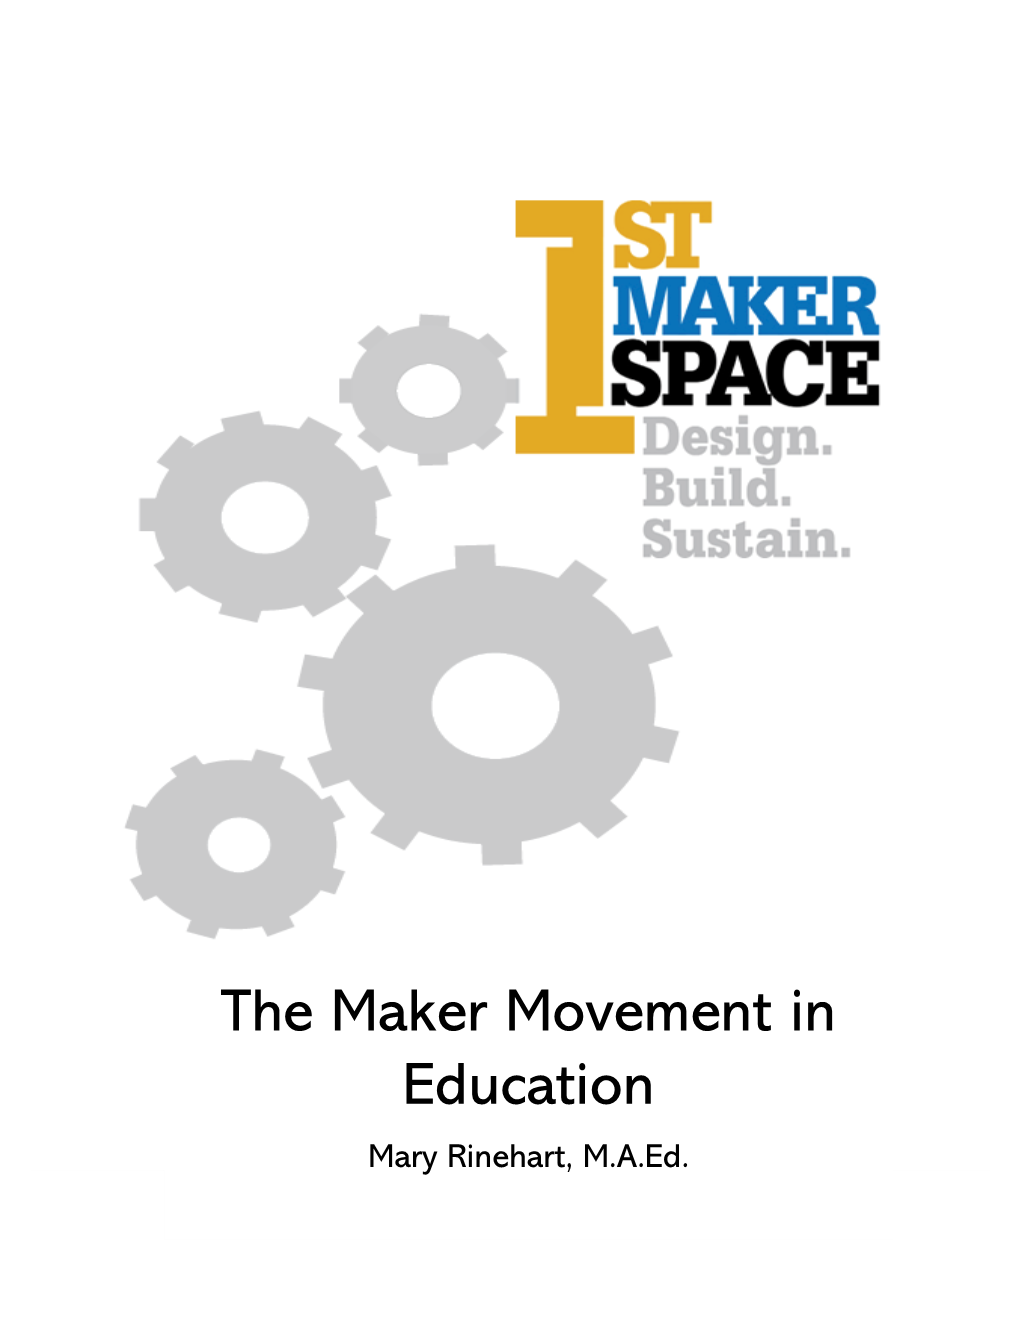 The Maker Movement in Education